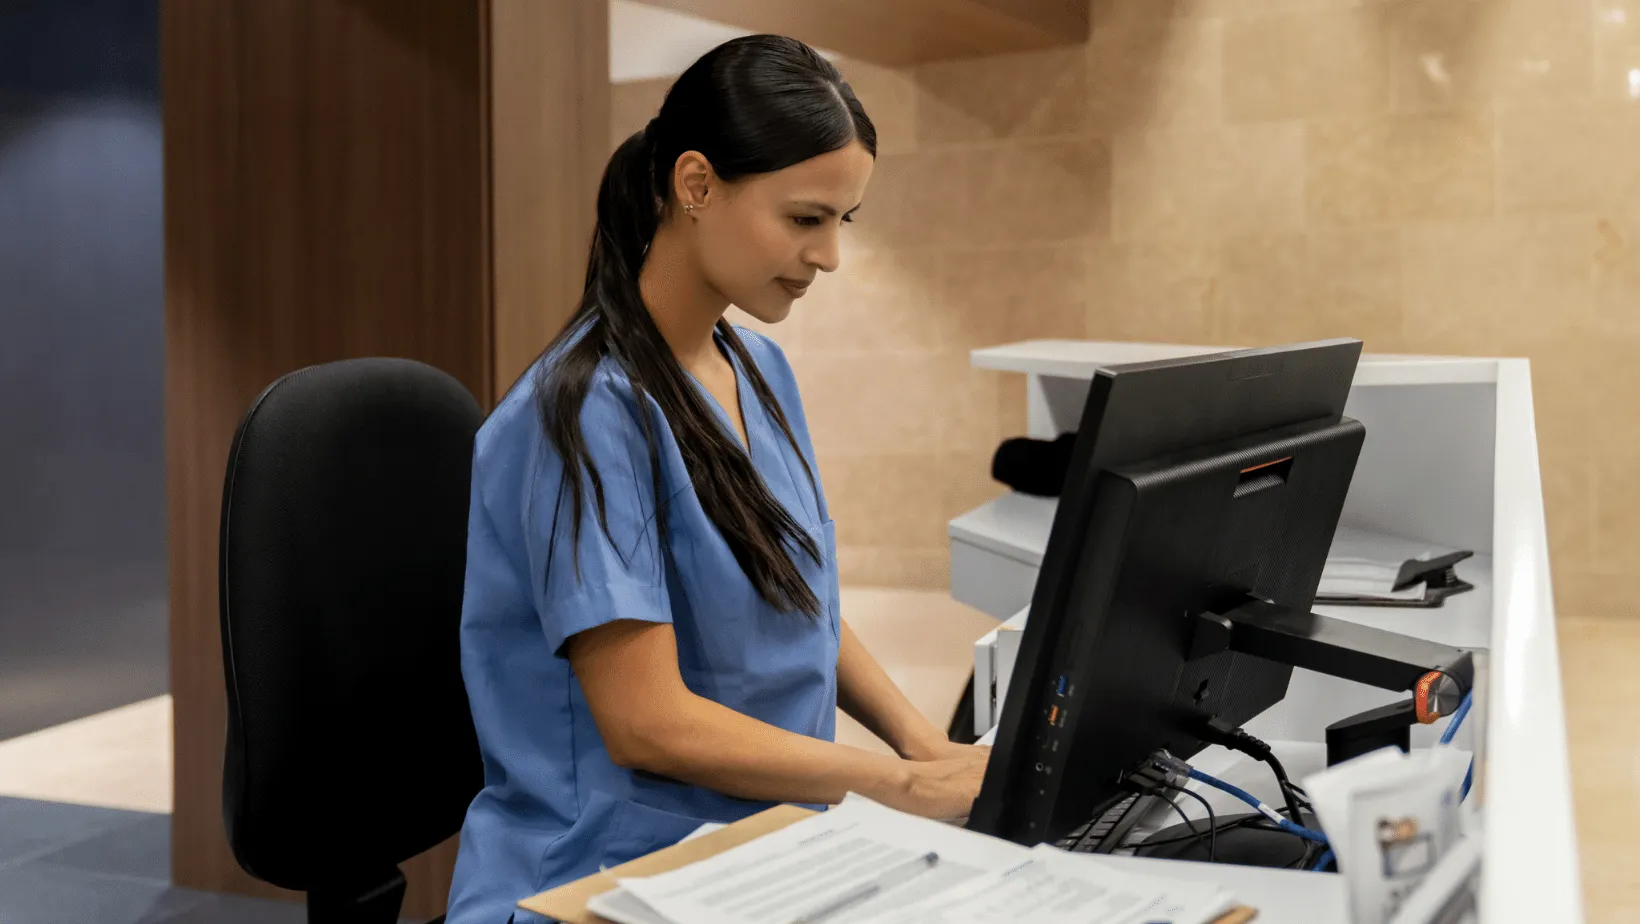 A focused healthcare worker in blue scrubs working at a computer station, presumably in a medical office or hospital setting, with papers and a phone visible on the desk.